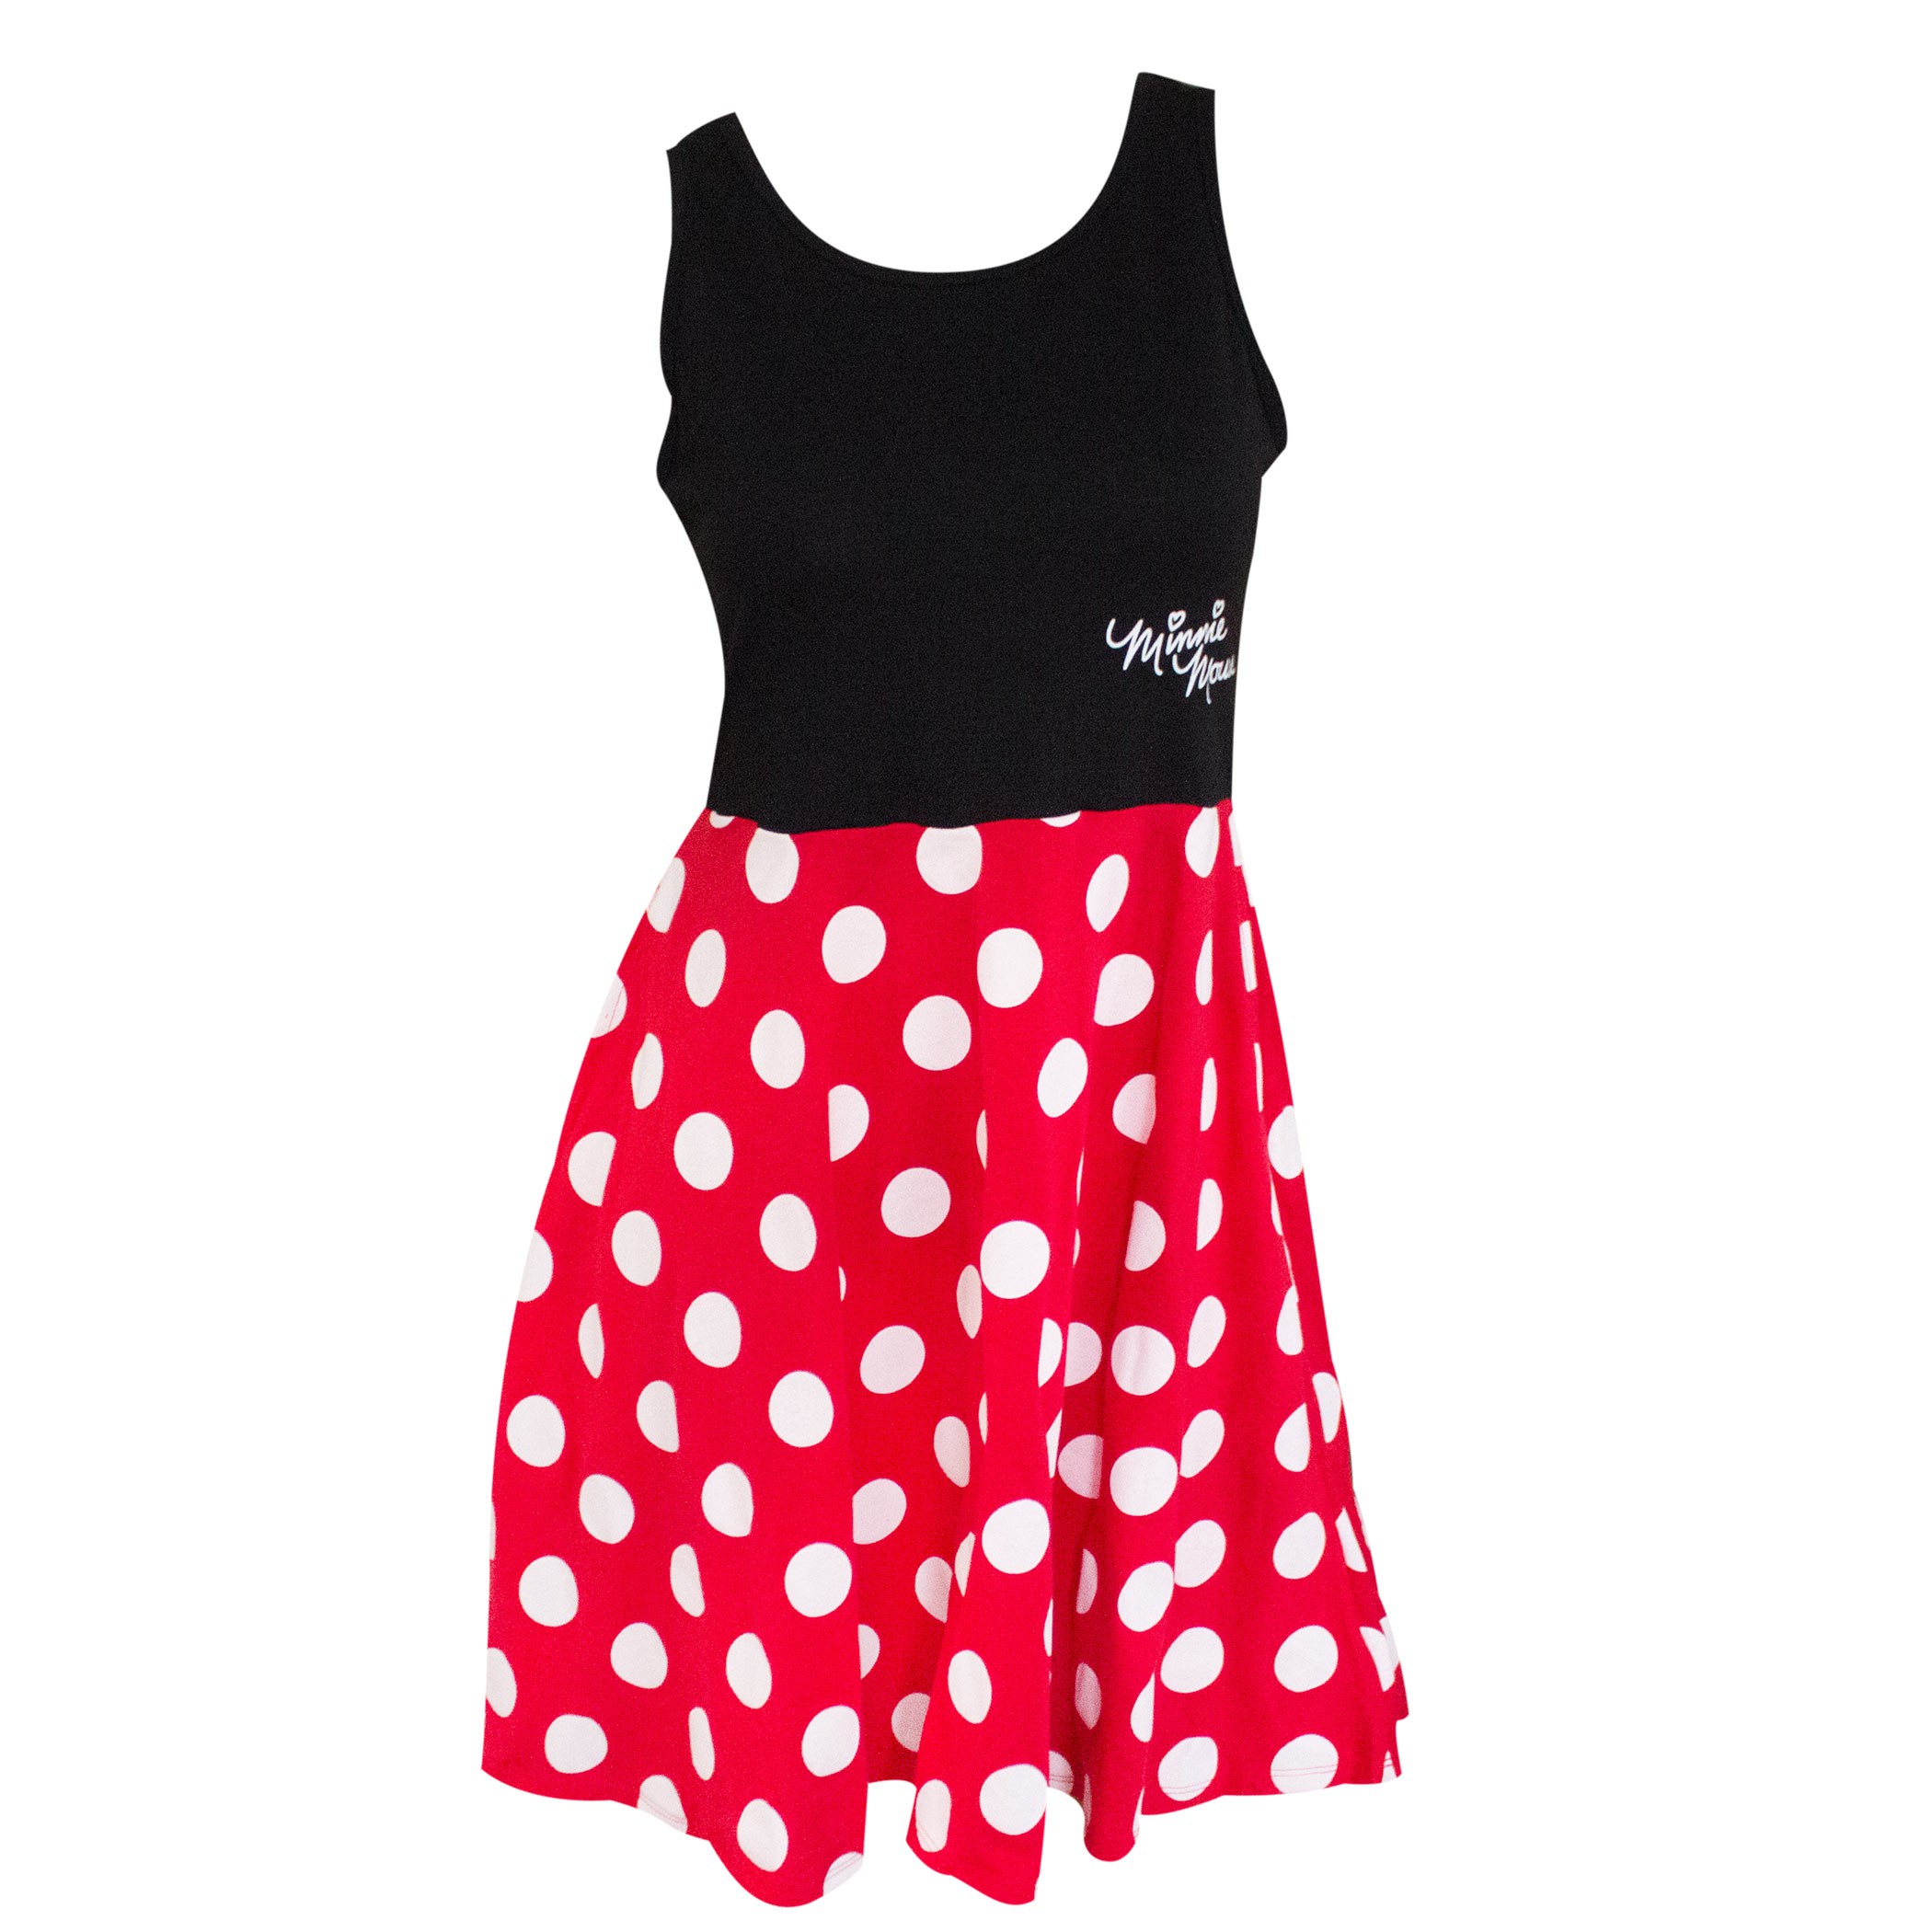 Minnie Mouse Women's Black And Red Polka Dot Dress